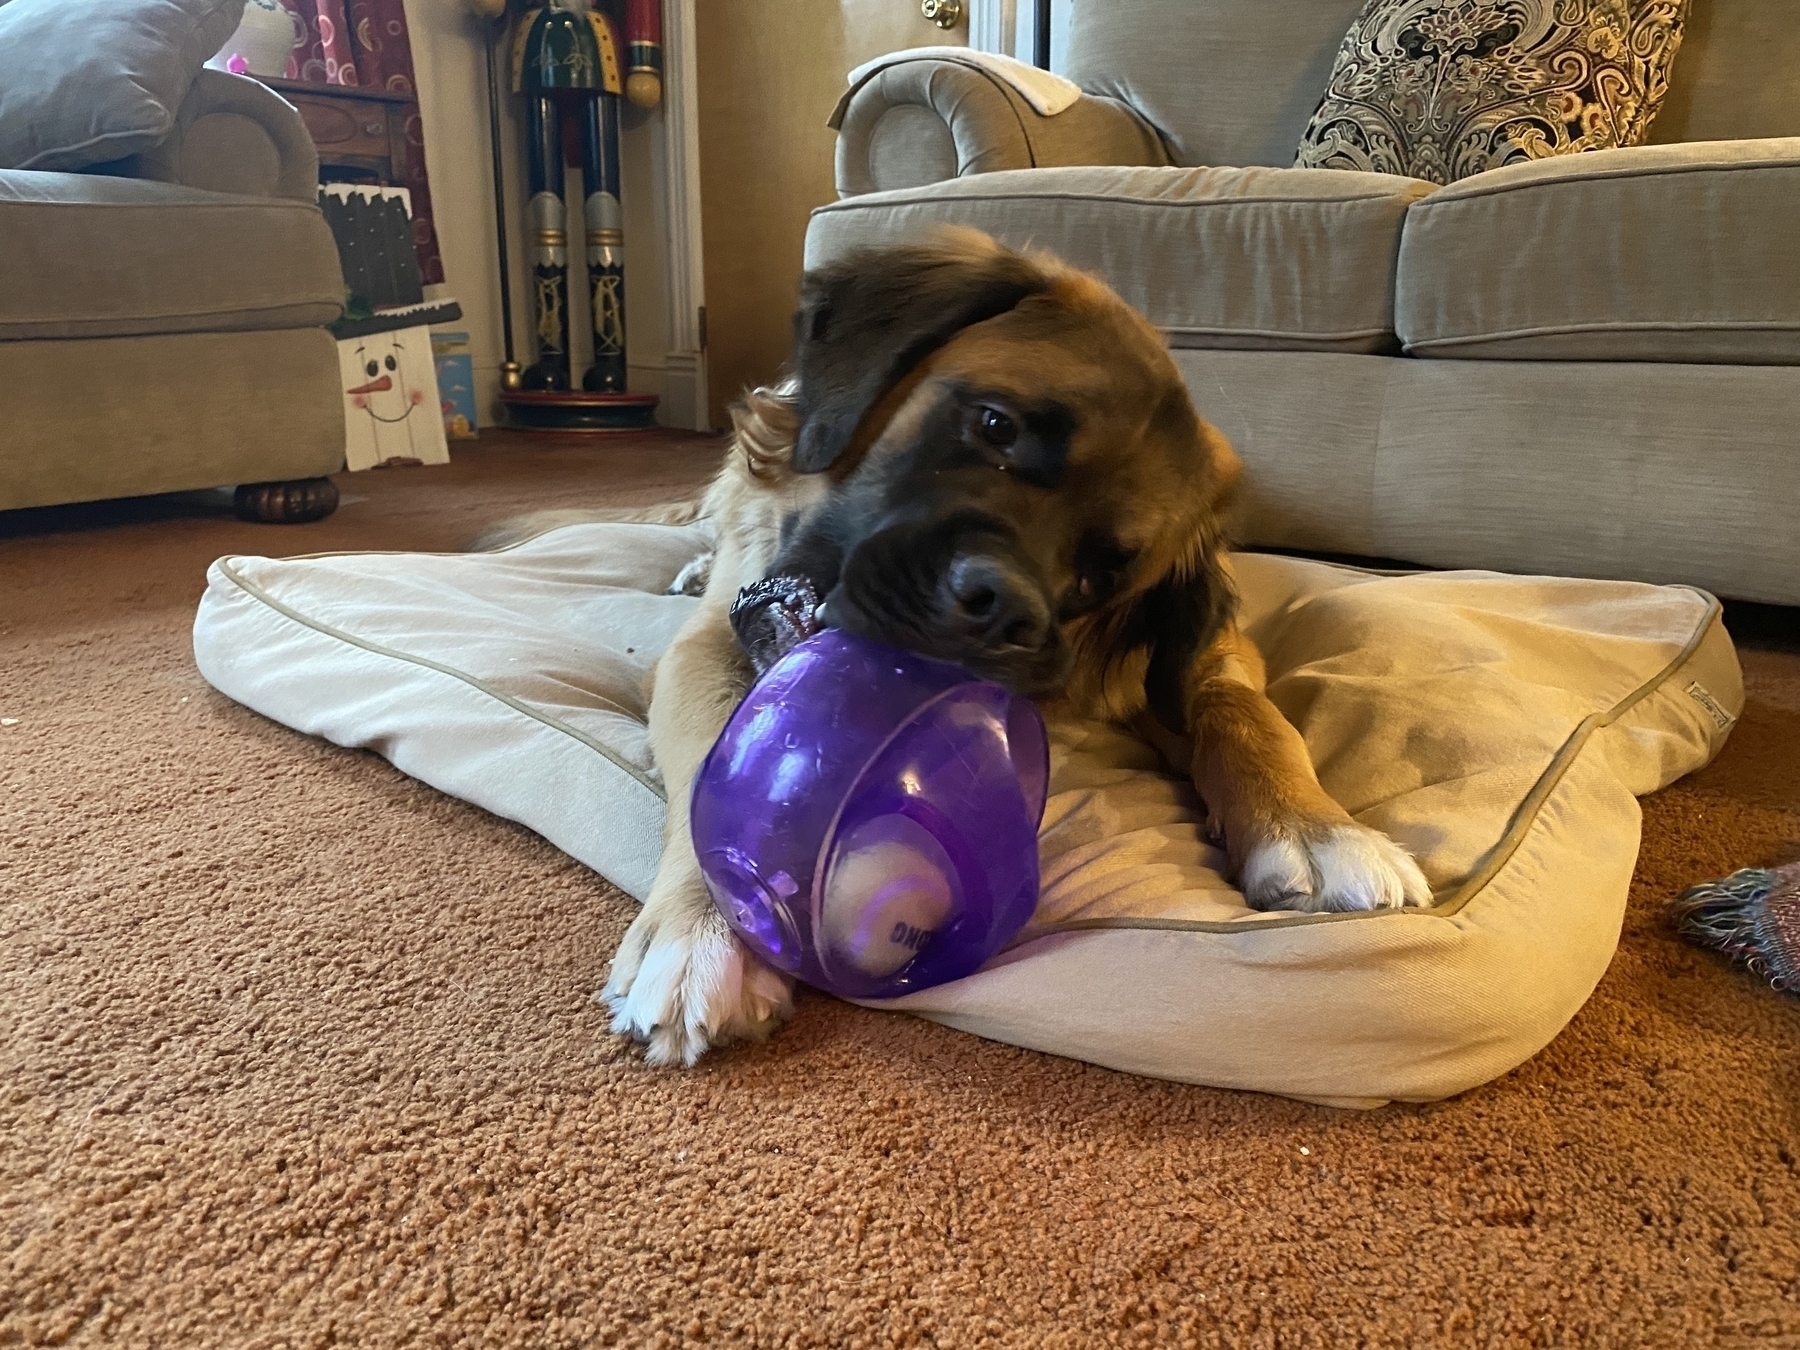 Gromit the dog, a 15 month old Saint Bernard/Golden Retriever with a large rubber squeaky ball.